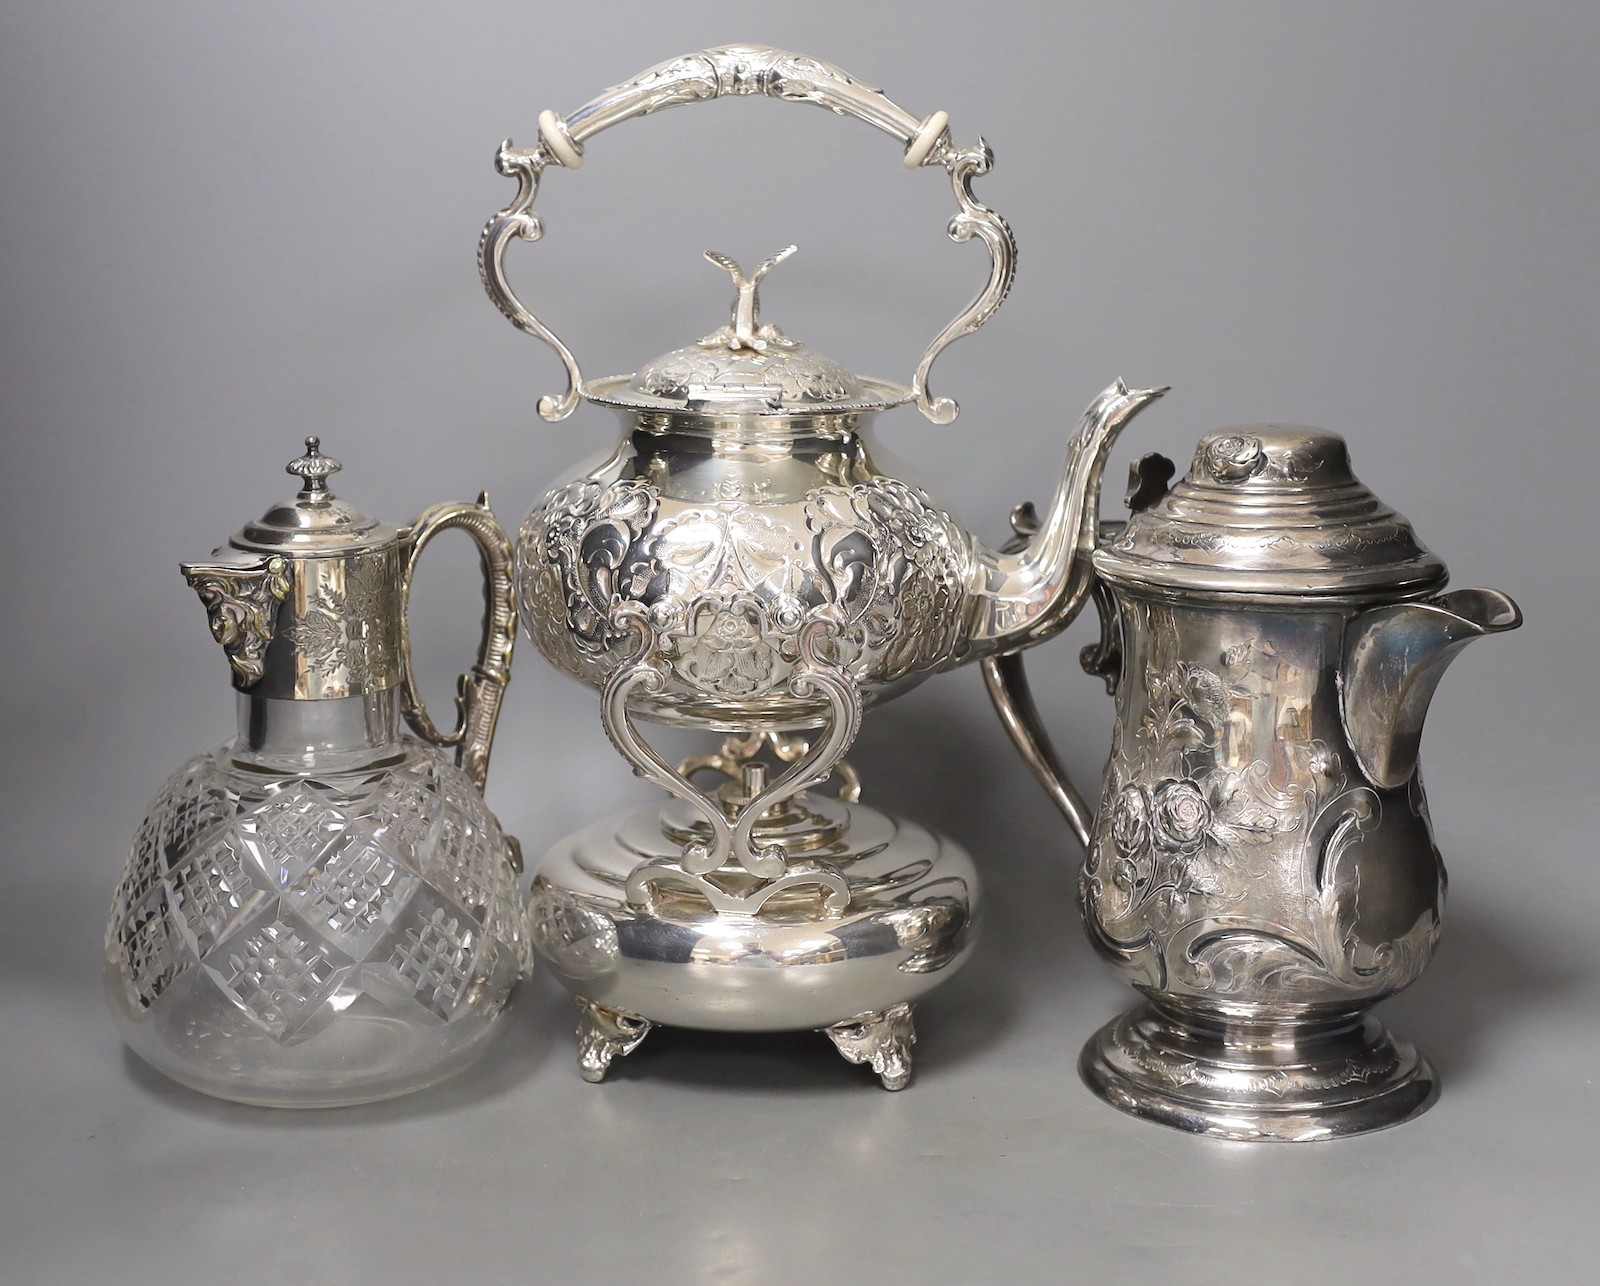 A silver plated tea kettle, burner and stand, ceramic insulators, 33 cm high a mounted claret jug and a tankard